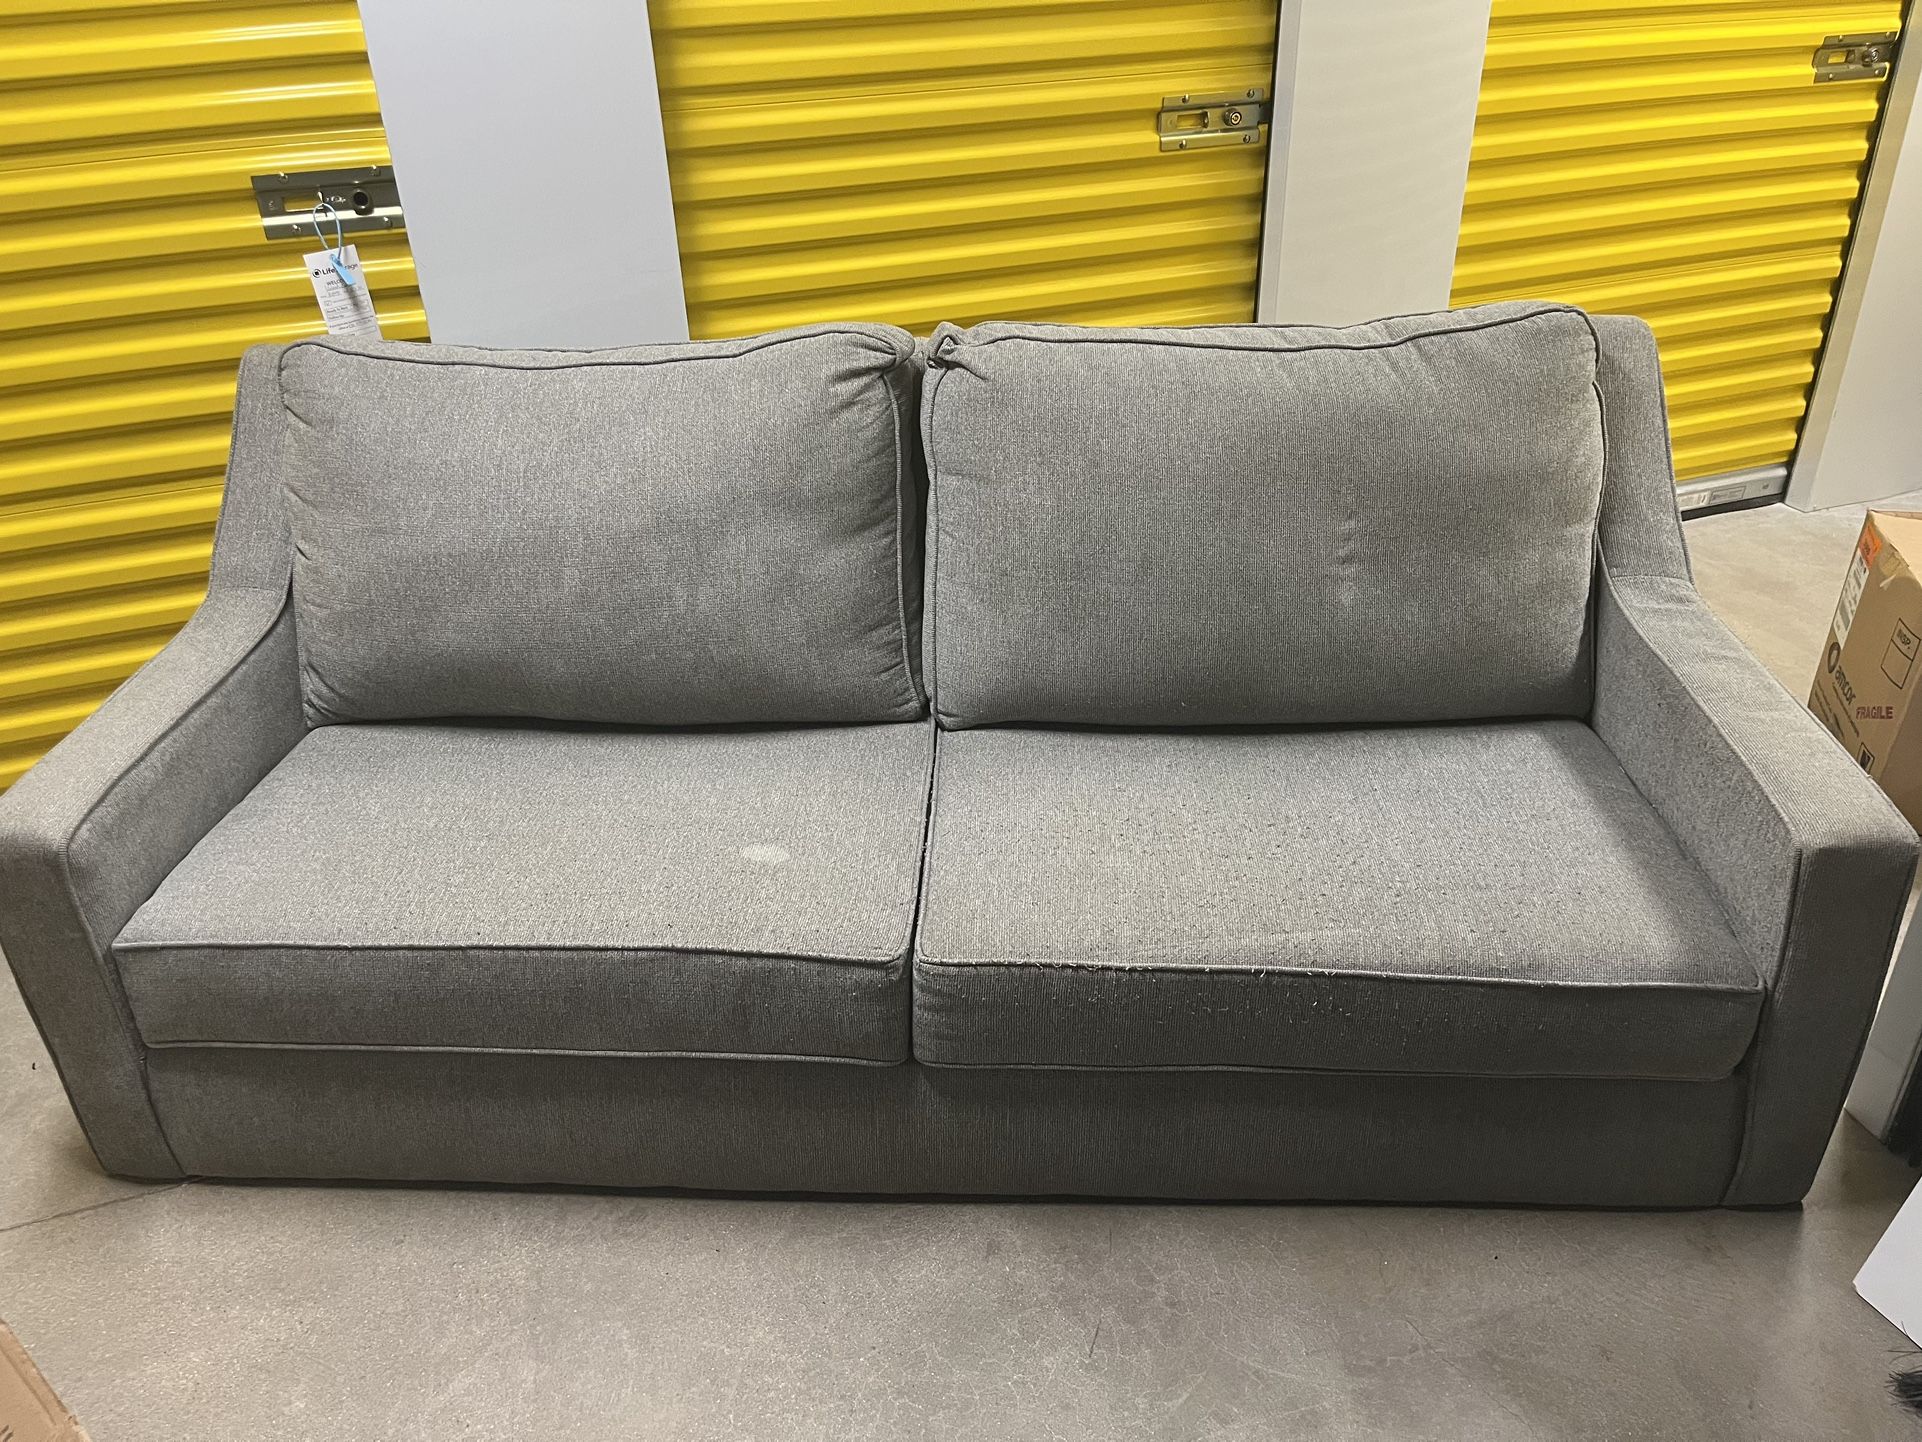 2 Gray Couches